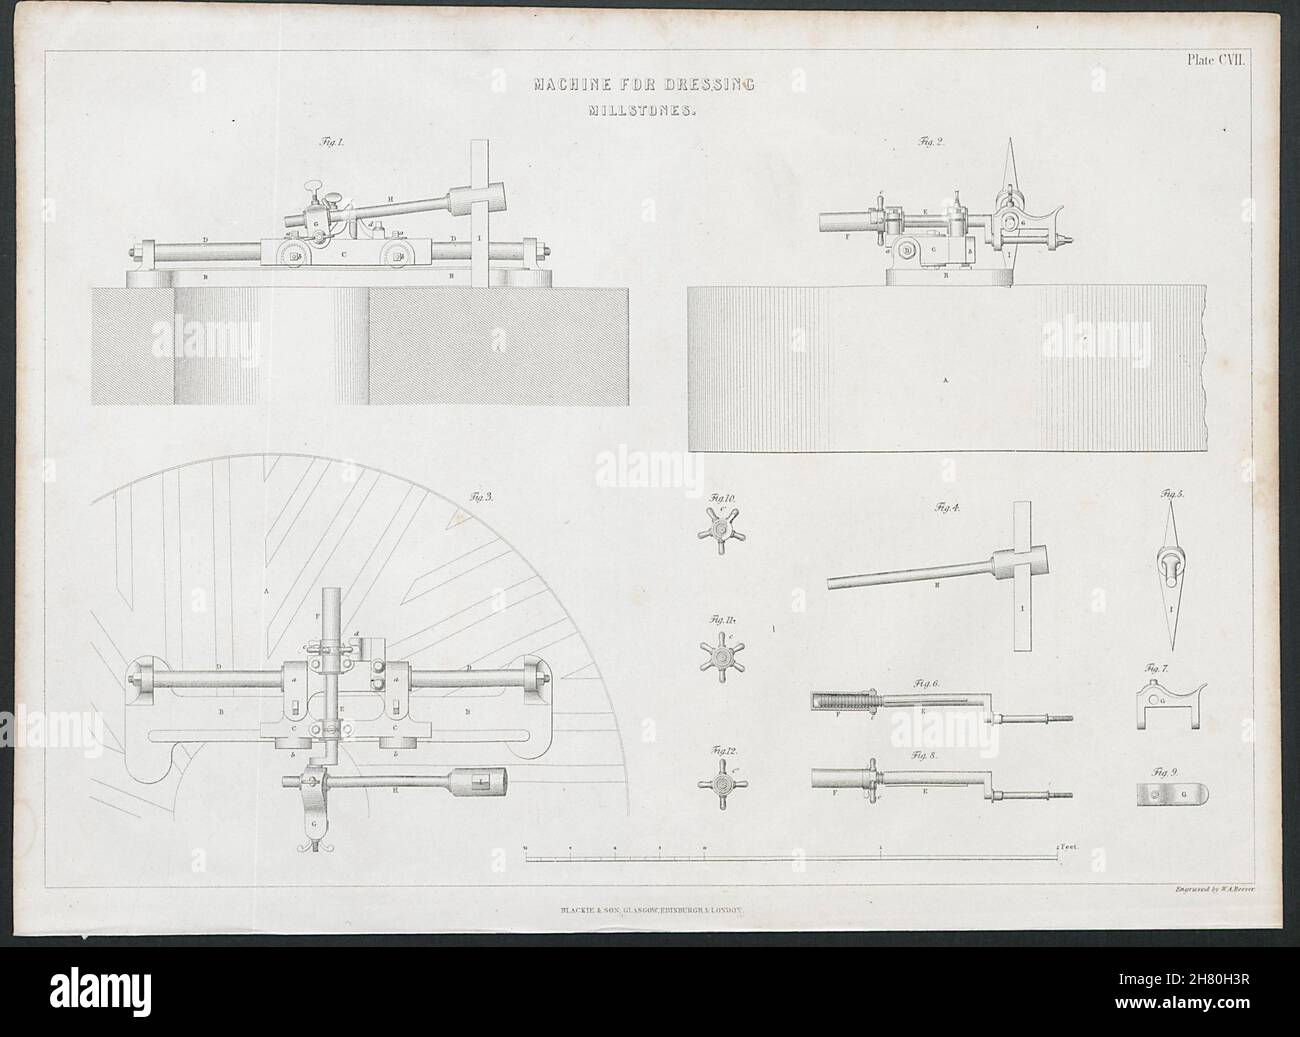 VICTORIAN ENGINEERING DRAWING Machine for dressing millstones 1847 old print Stock Photo